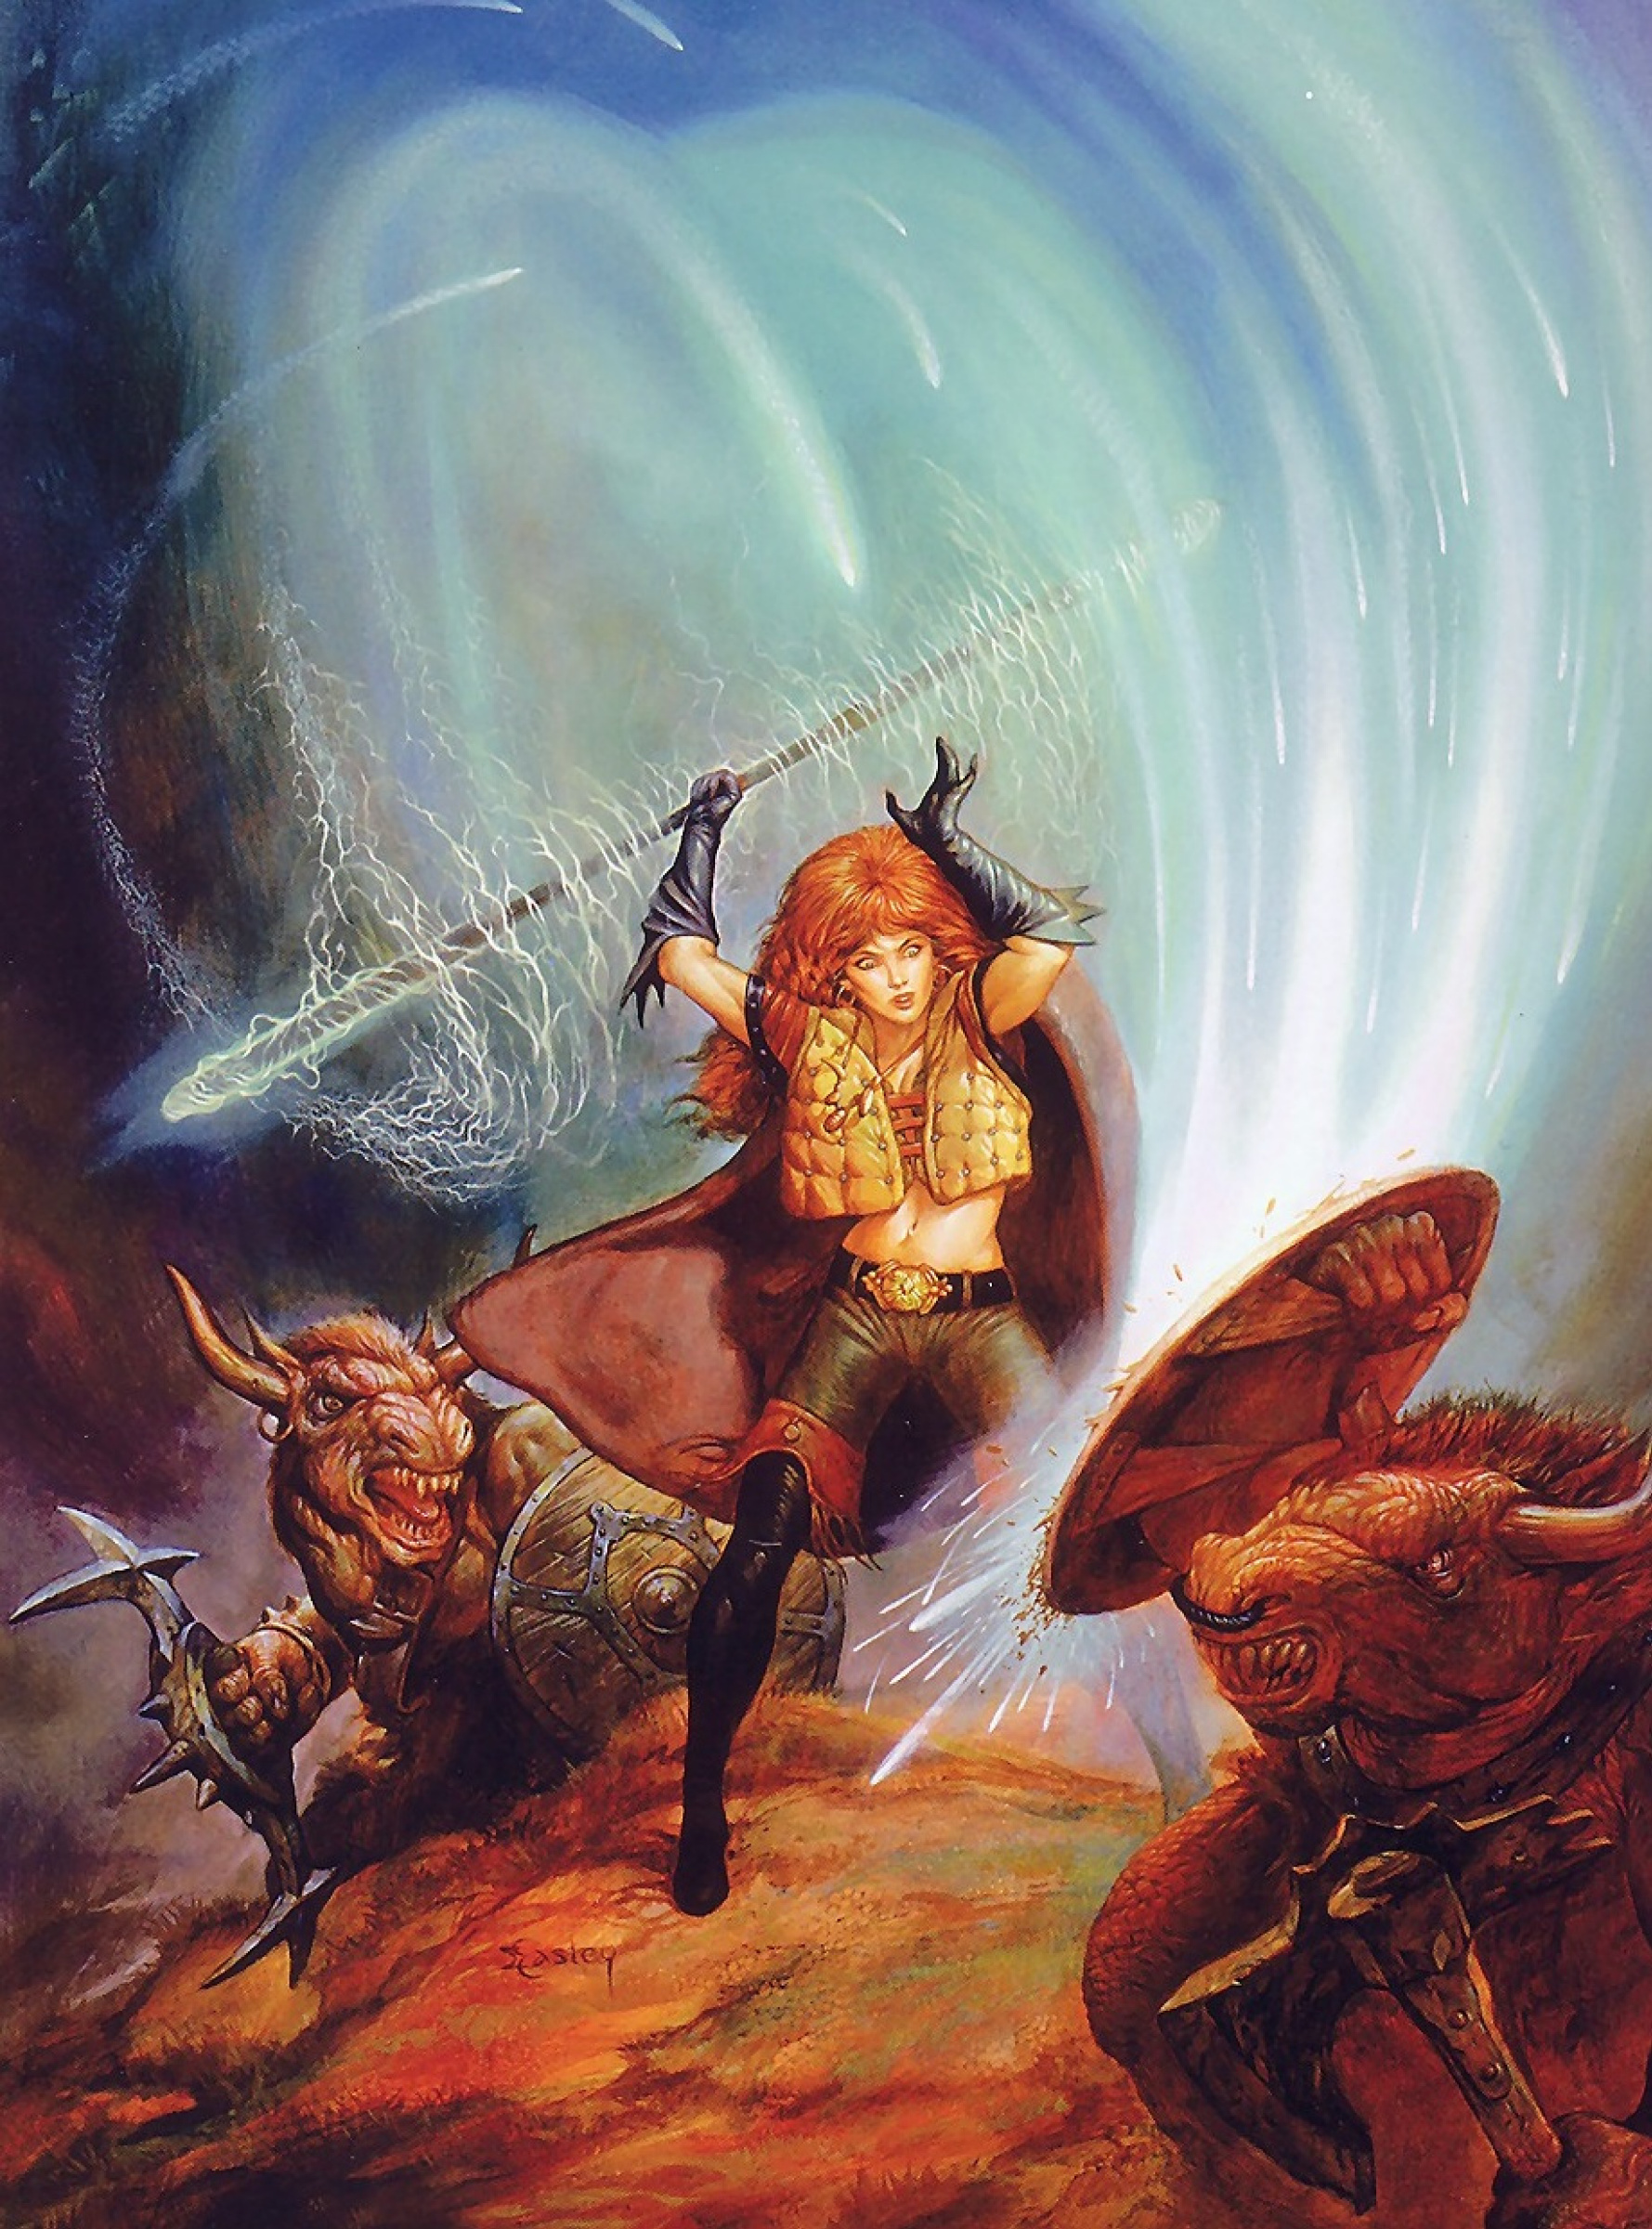 Jeff Easley Artwork for Sale at Online Auction